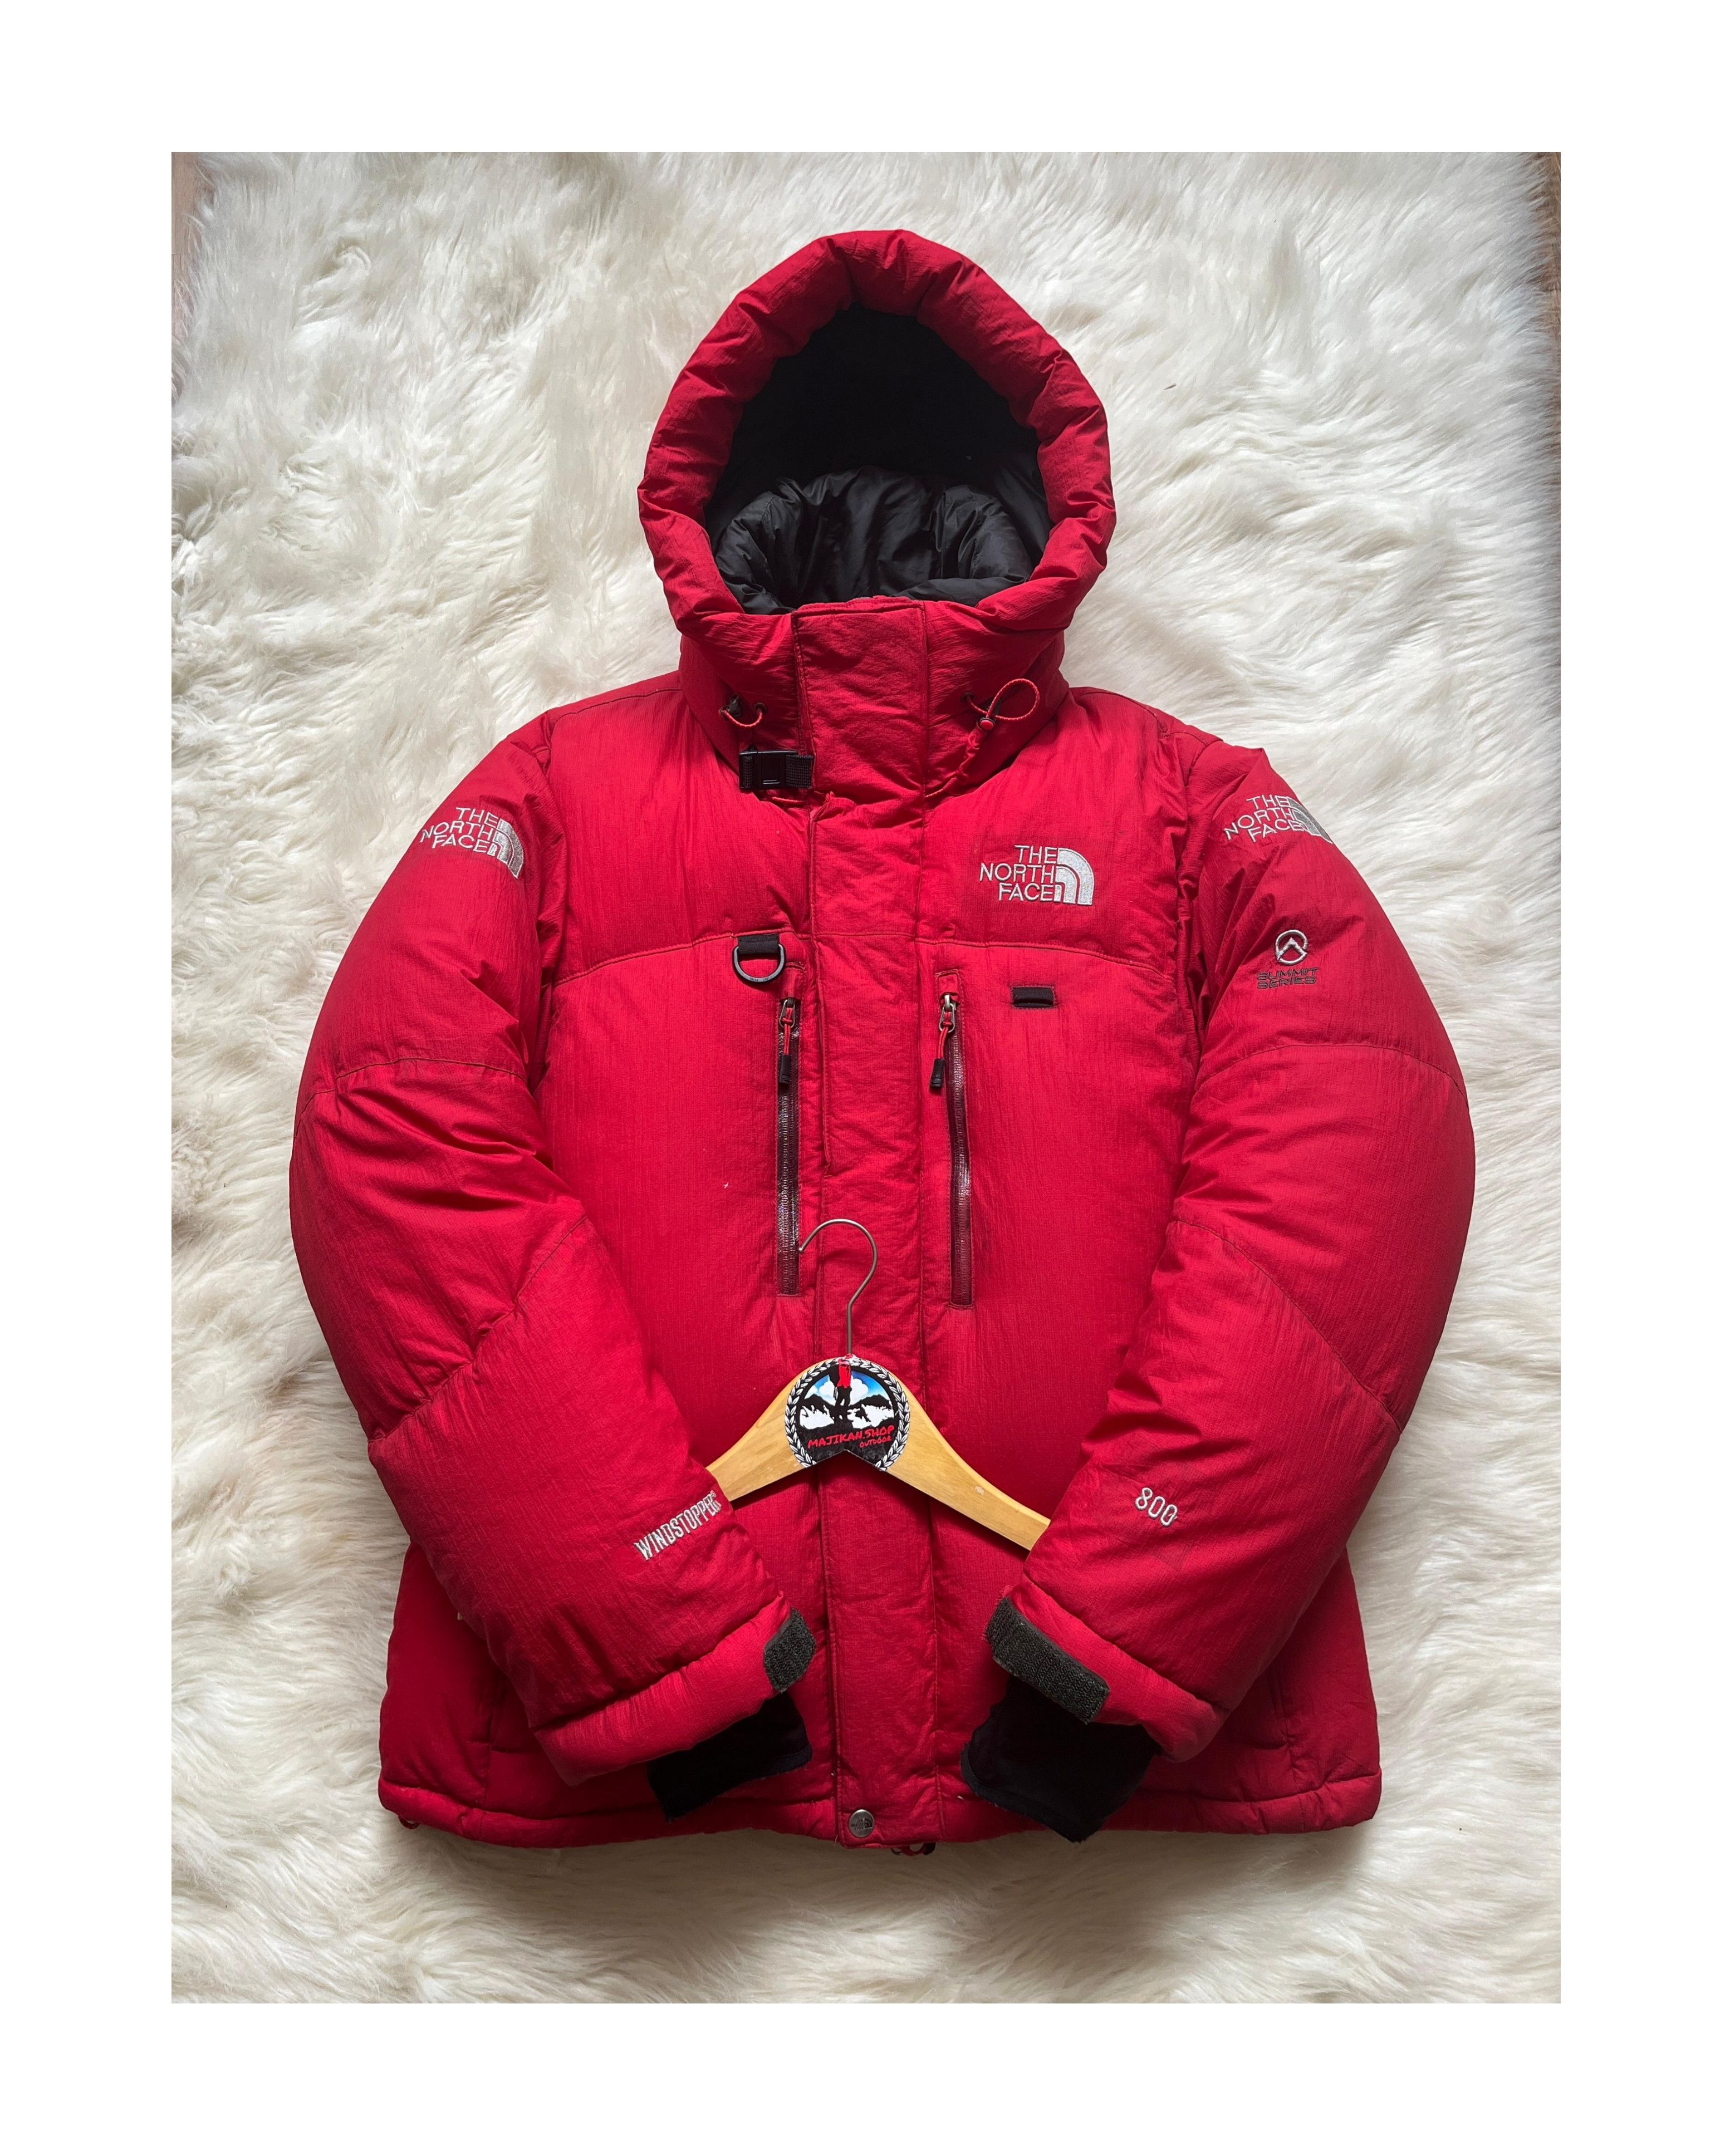 The North Face The north face himalayan parka down jacket | Grailed